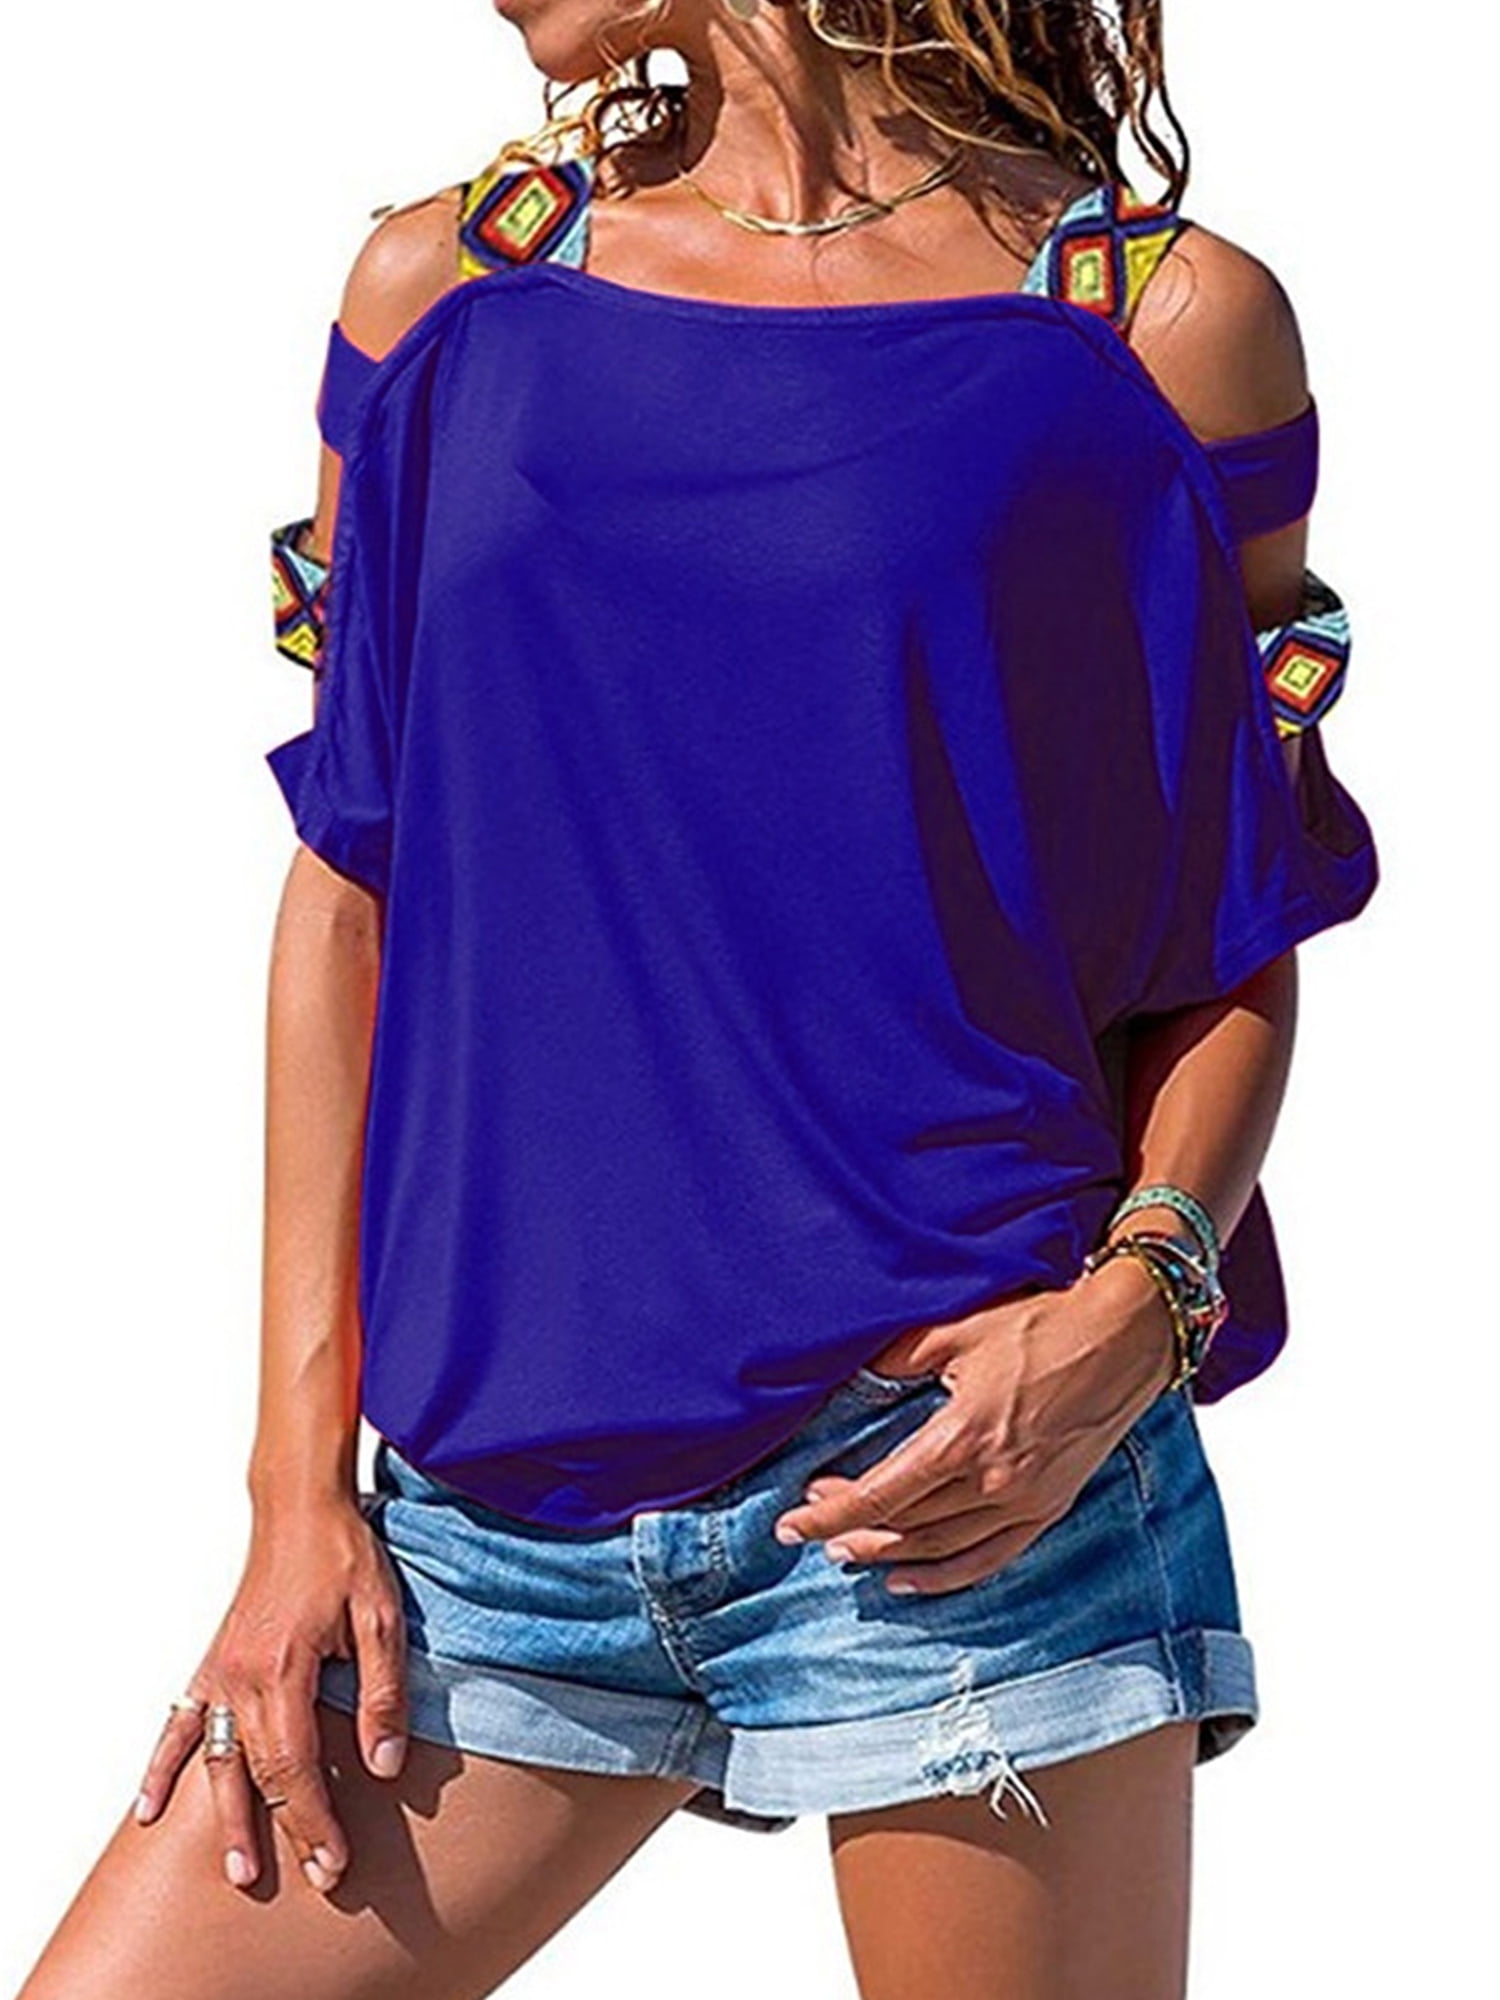 Sexy Dance - Women Summer Cold Shoulder Loose Top Blouse Ladies Casual ...